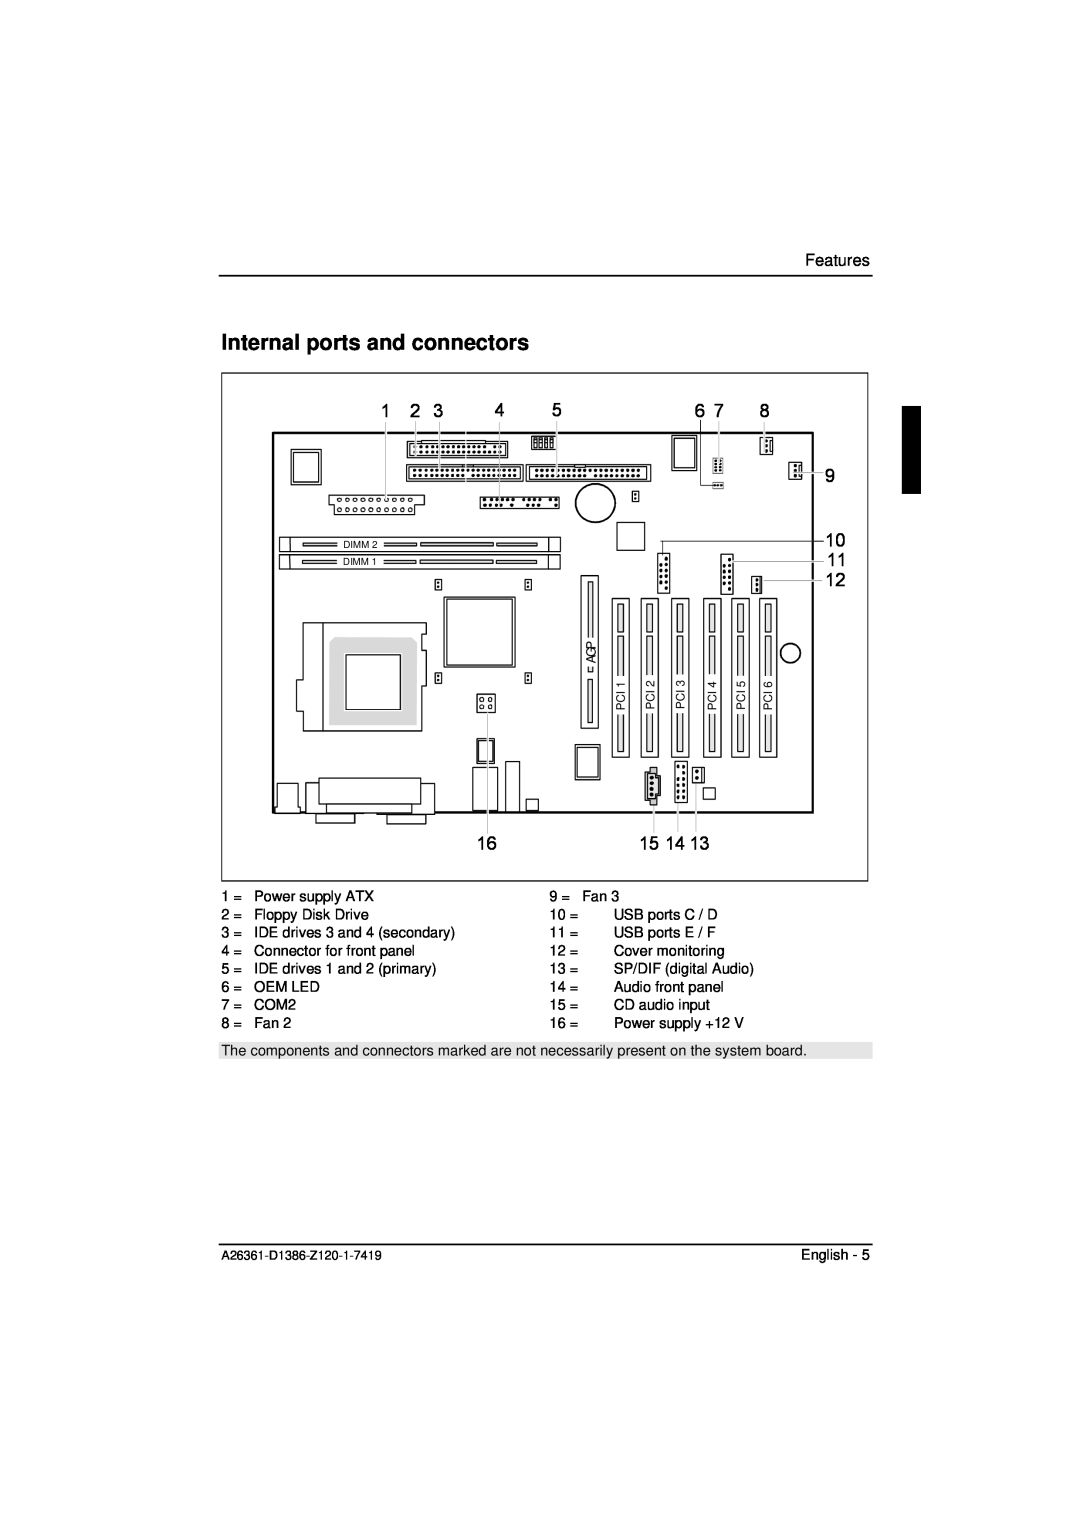 Fujitsu D1386 technical manual Internal ports and connectors, Features, Dimm Dimm 